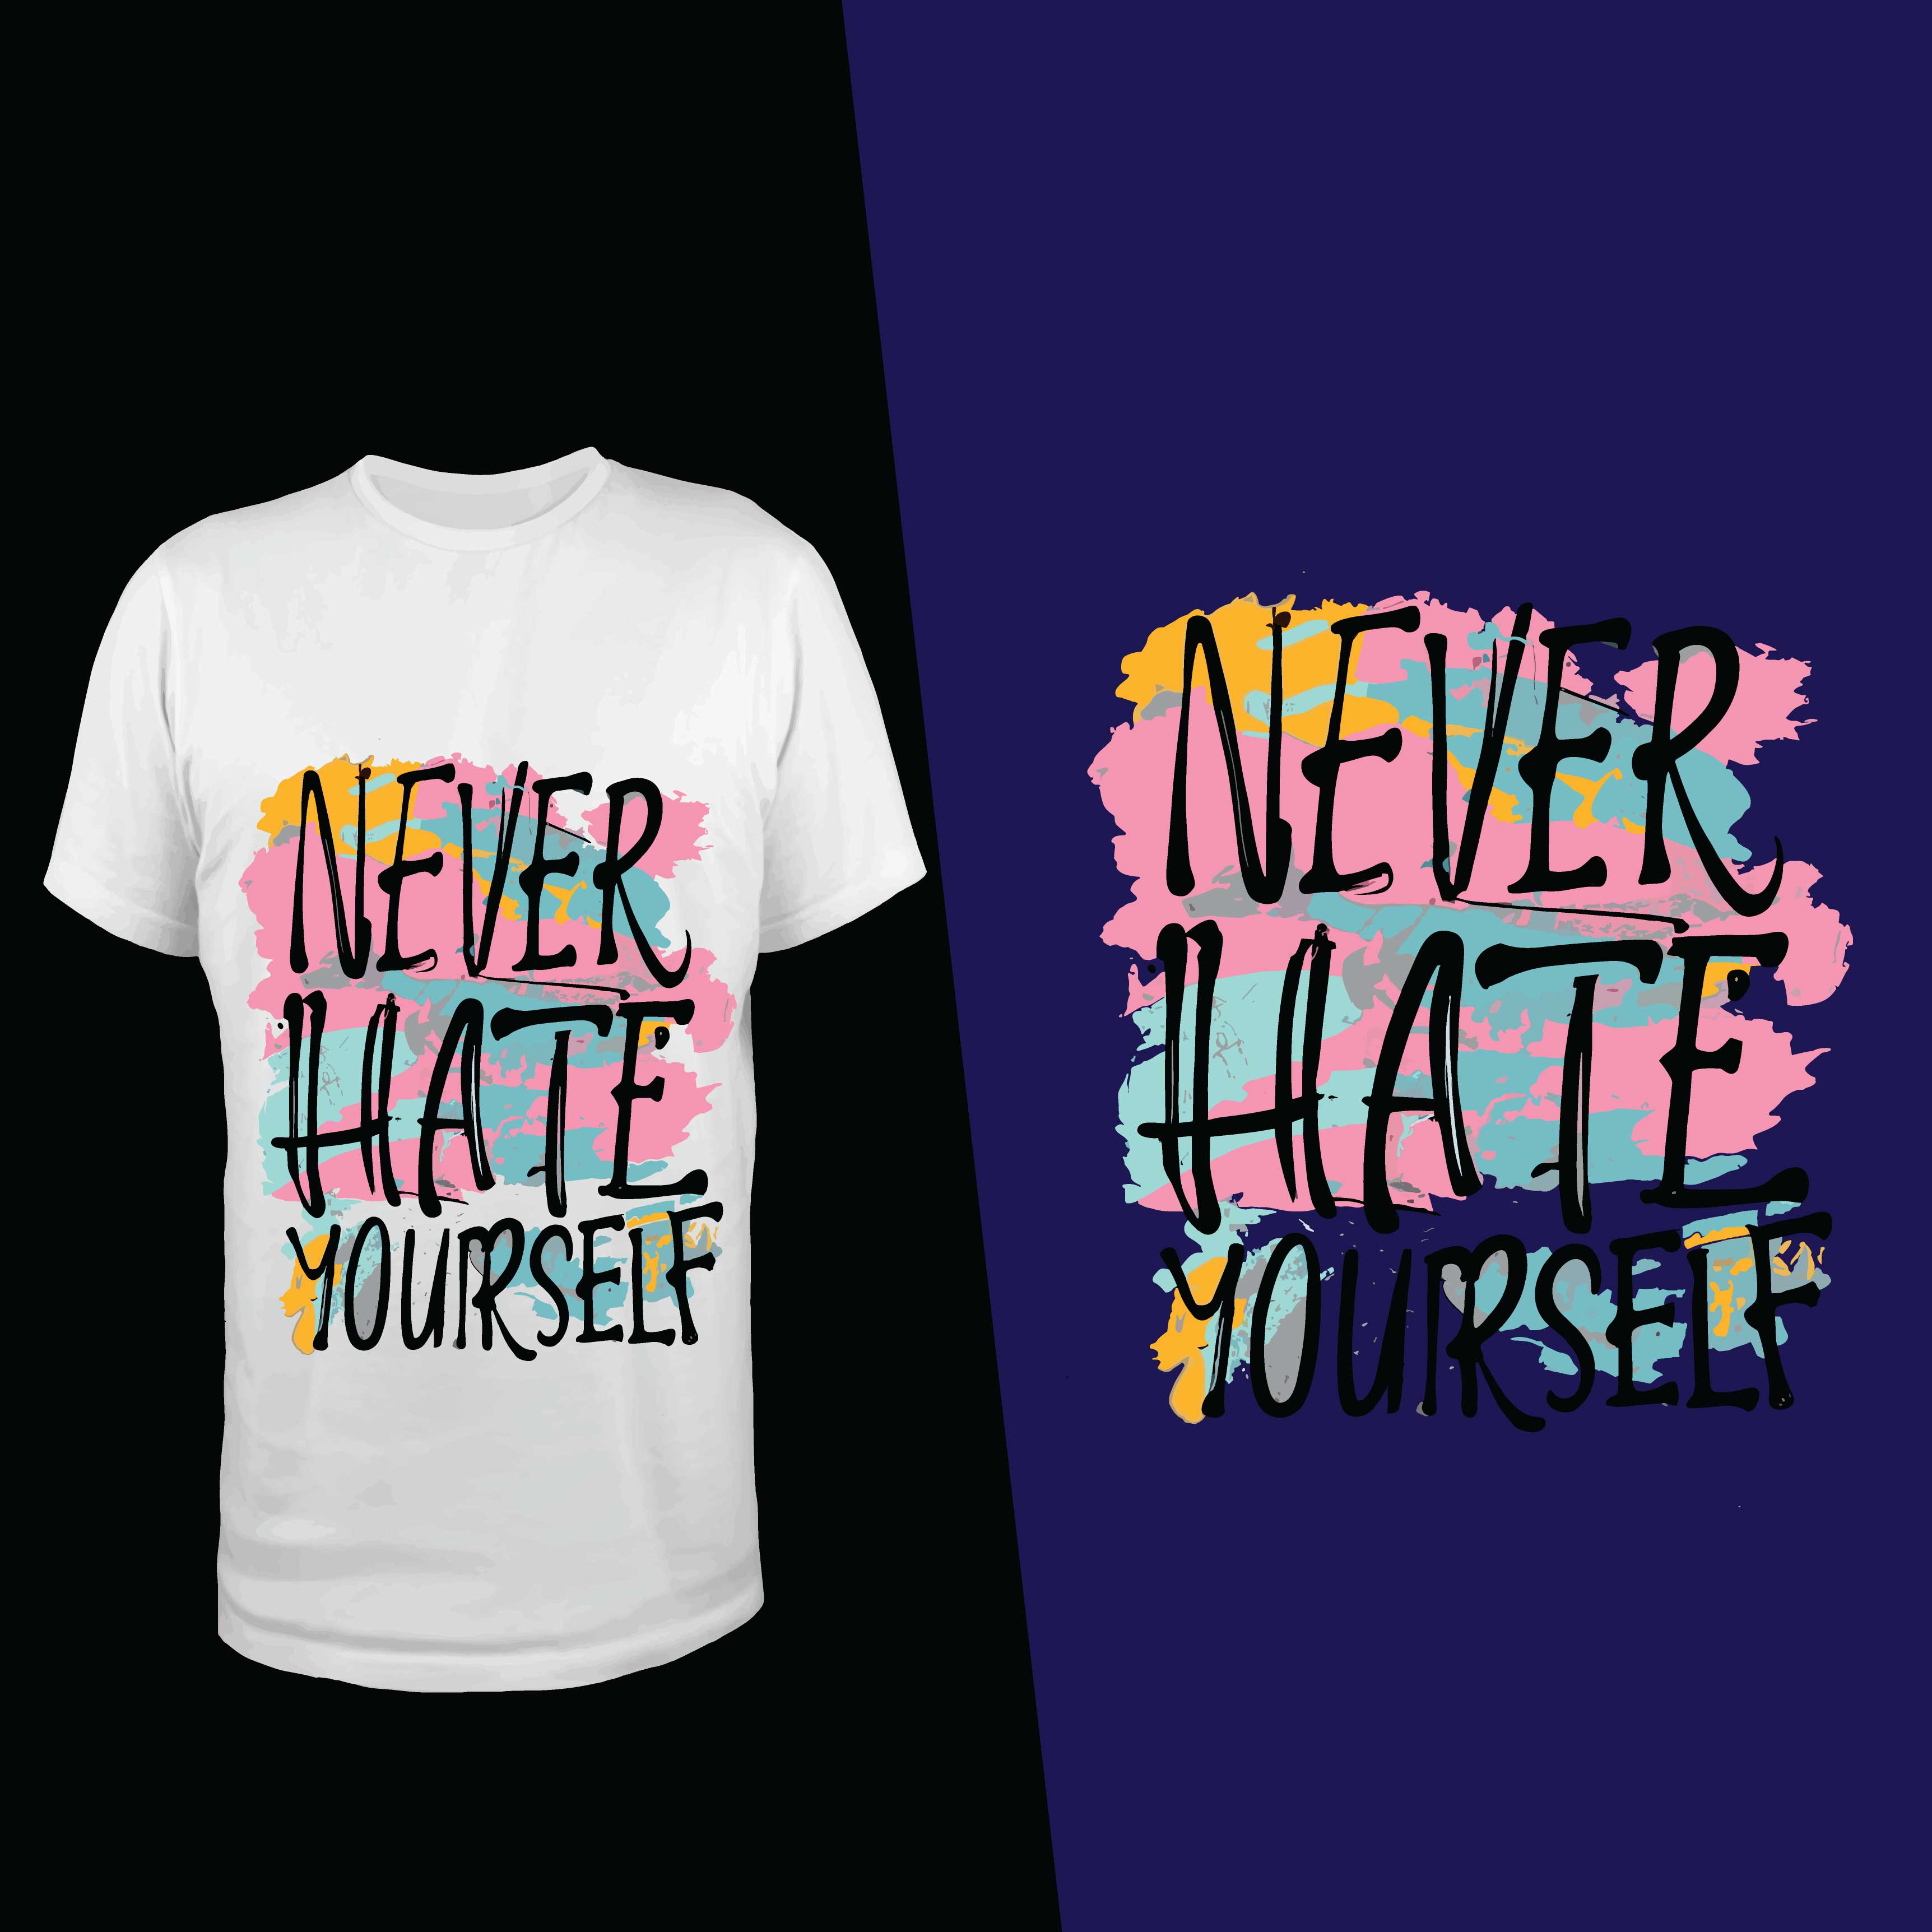 white t shirt design for never hate yourself converted 201